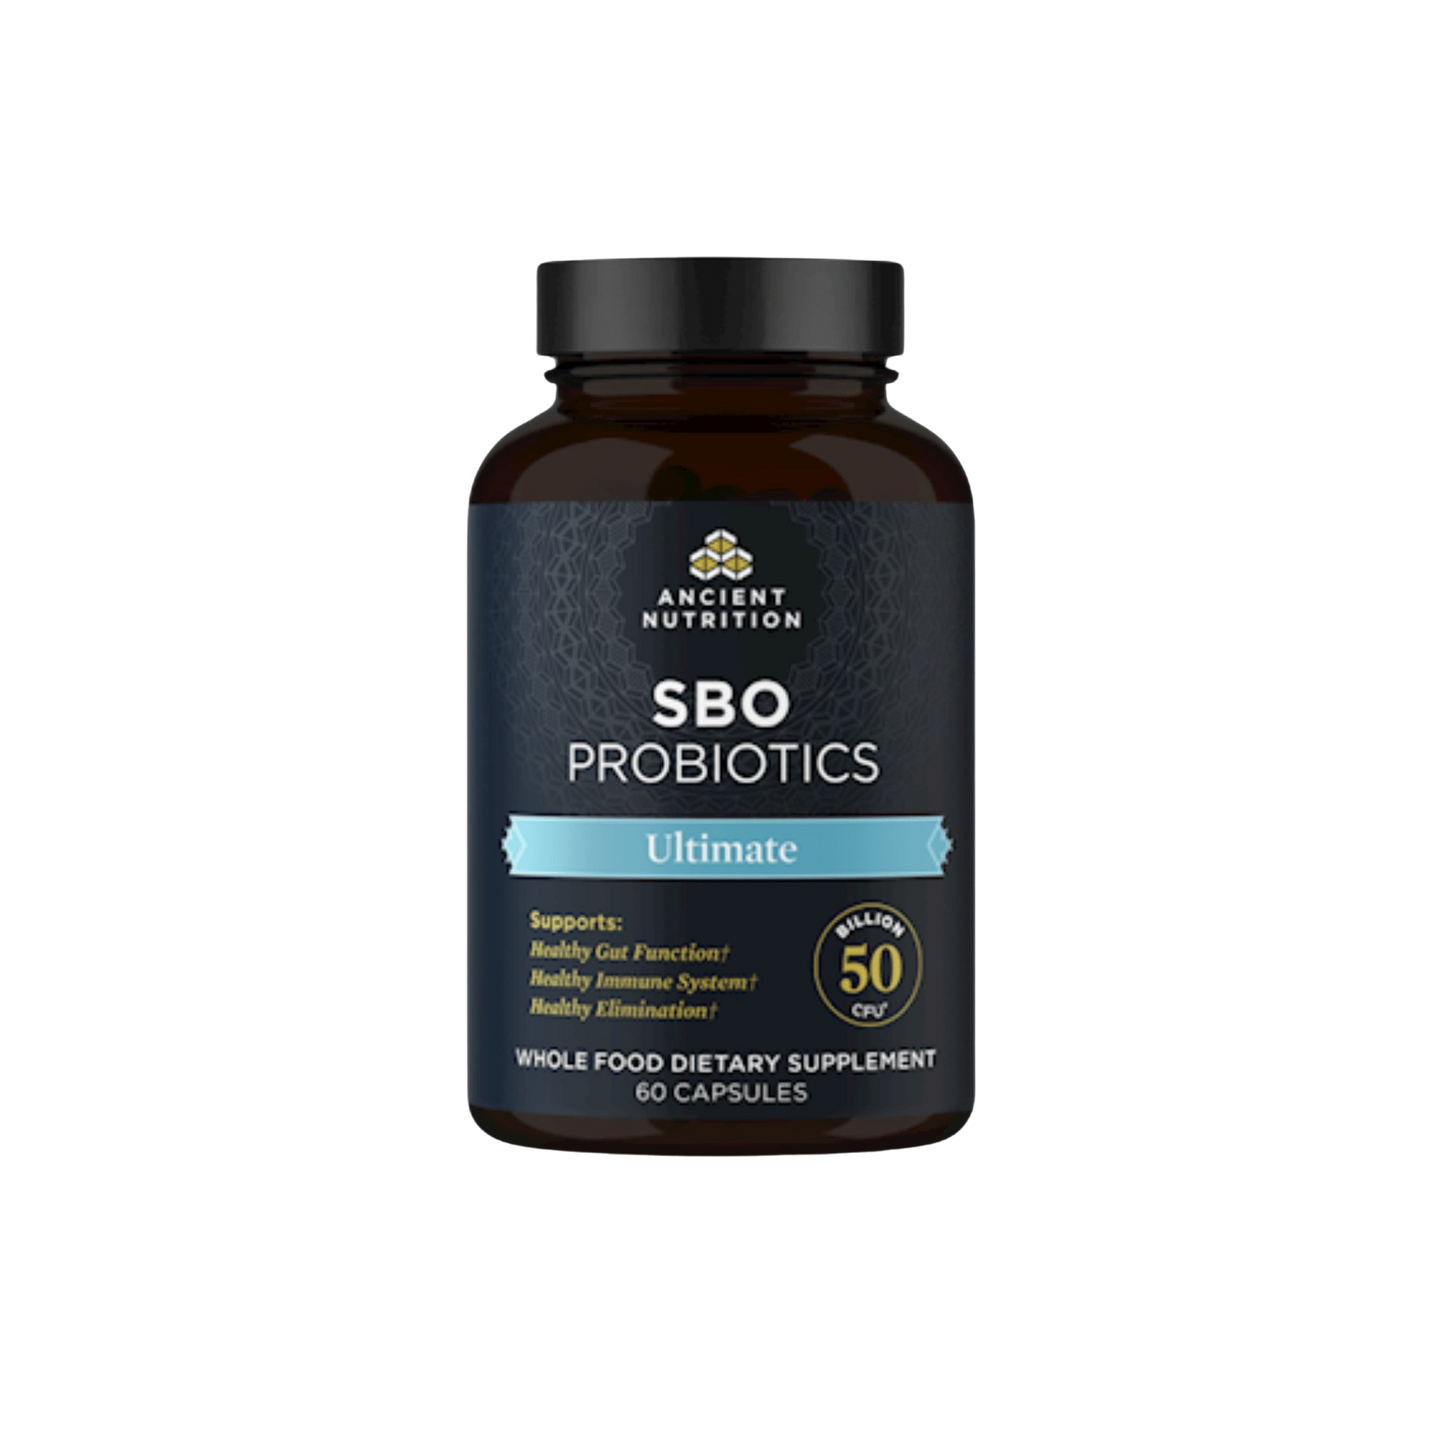 Ancient Nutrition SBO Probiotic Ultimate Capsules